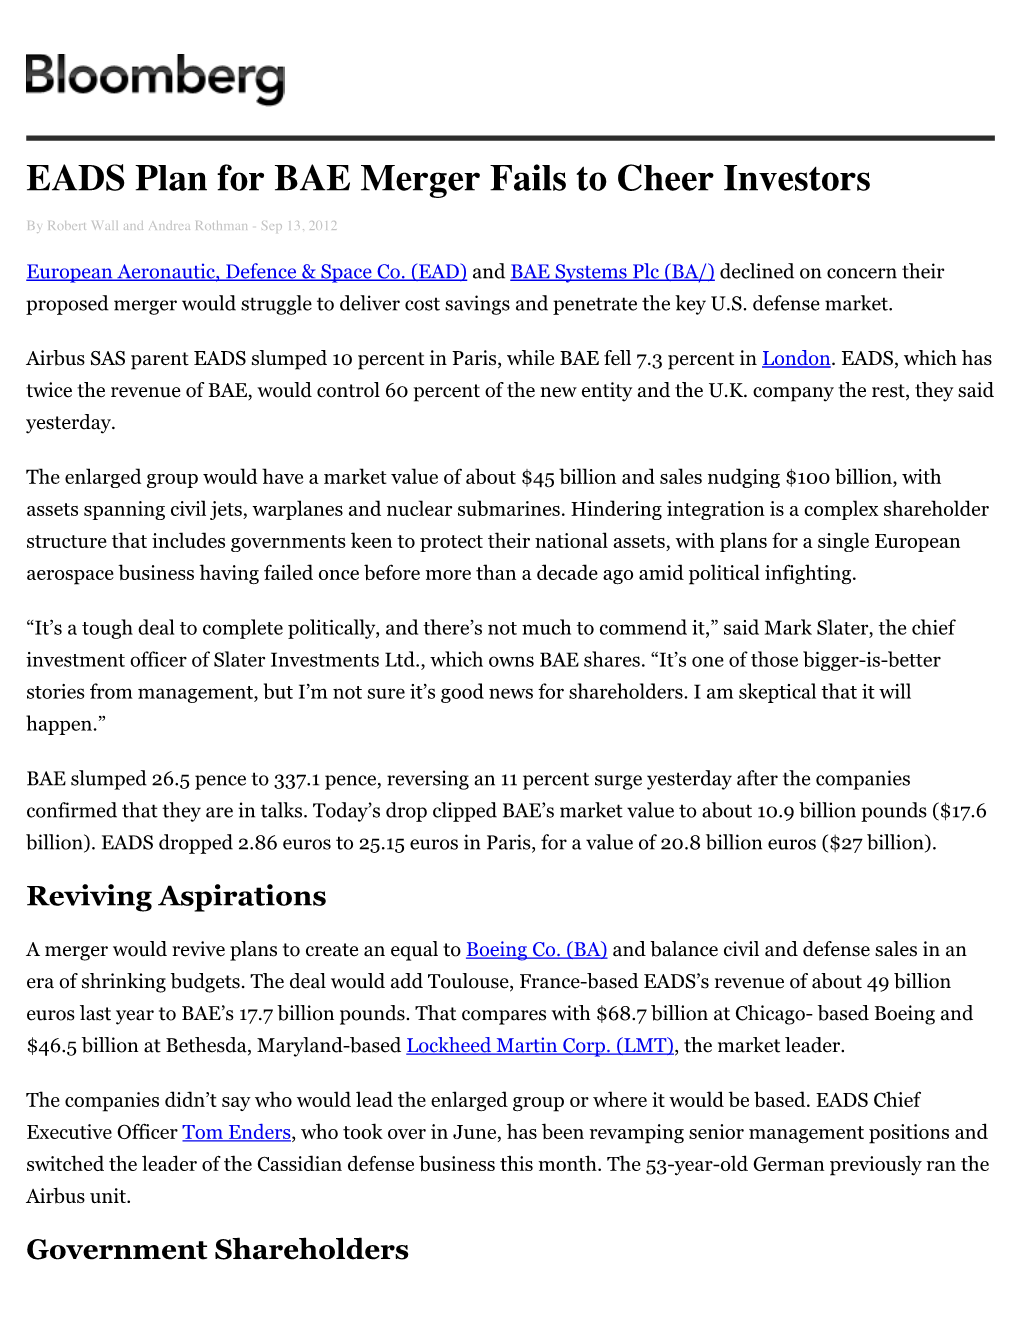 EADS Plan for BAE Merger Fails to Cheer Investors